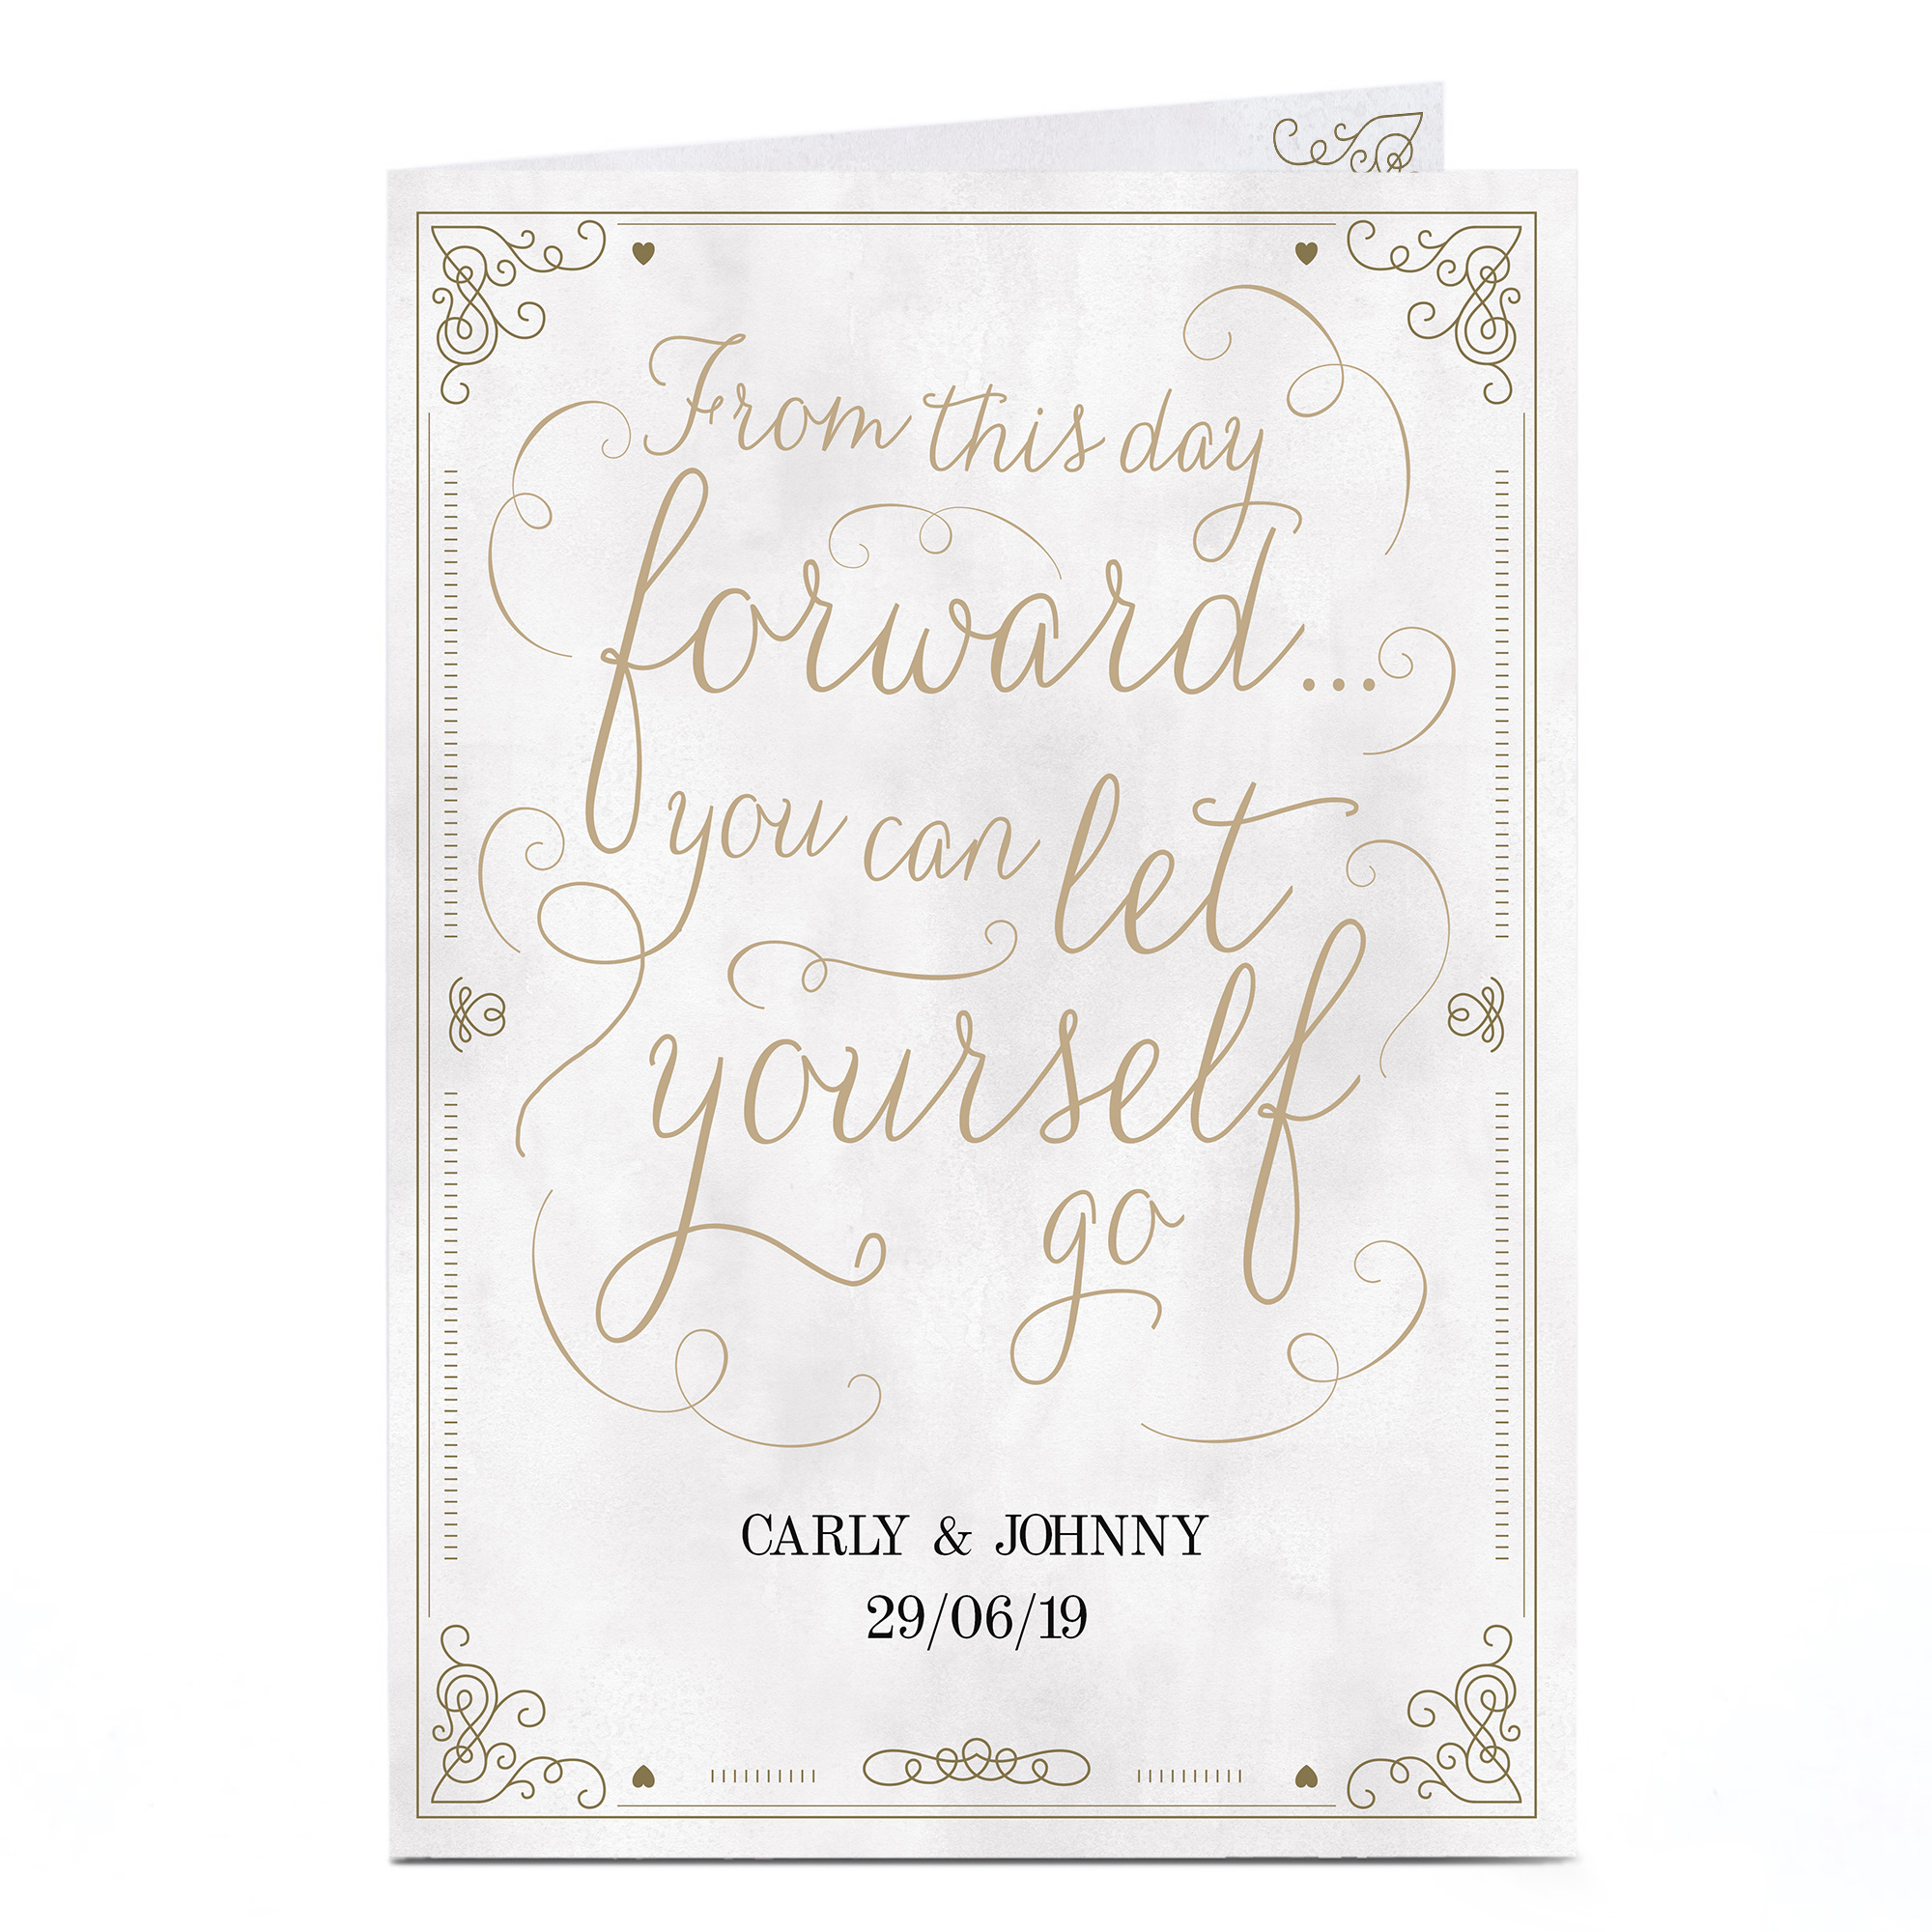 Personalised Wedding Card - From This Day Forward...